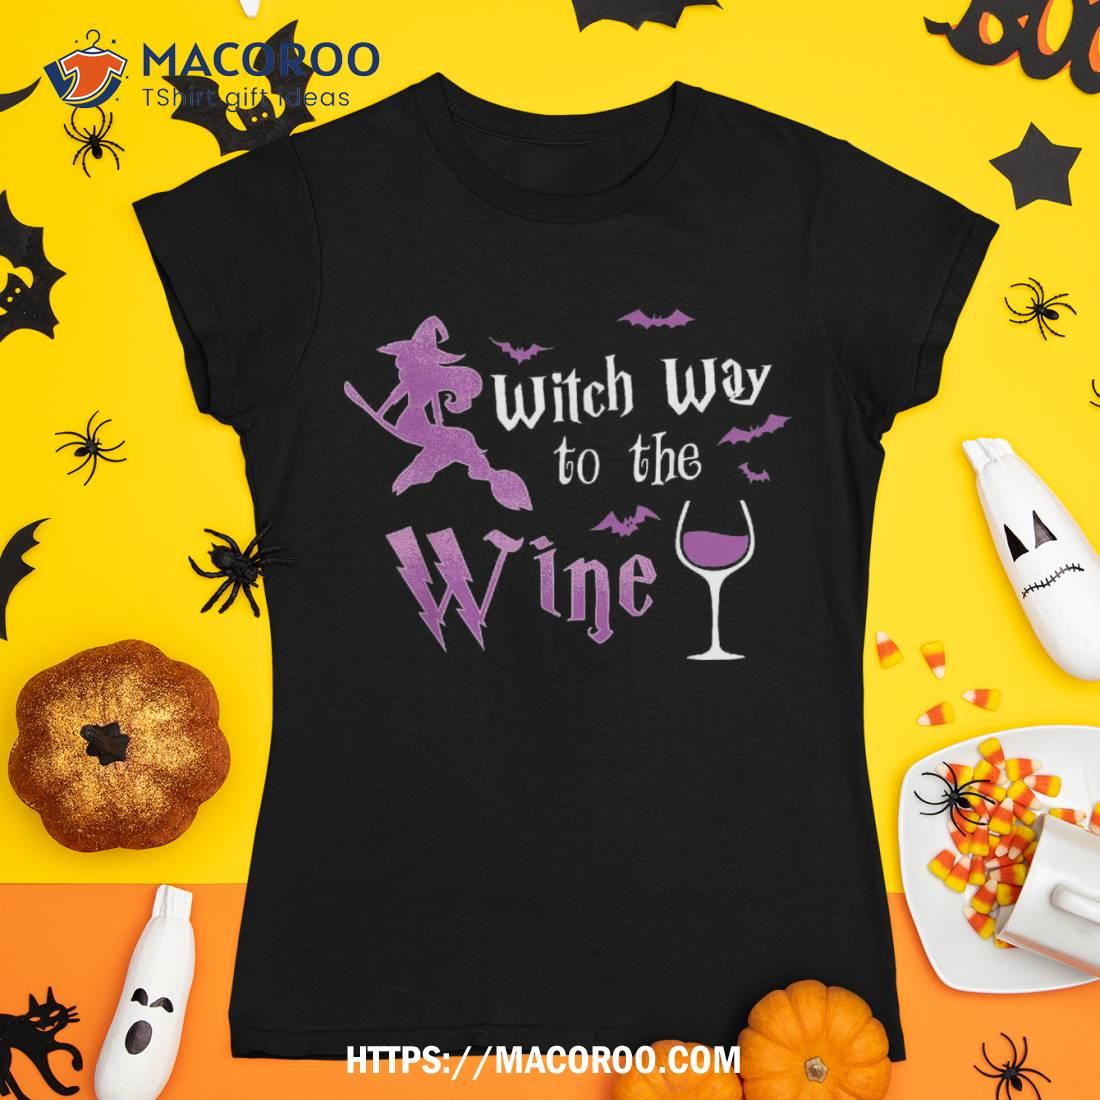 Witch Way To The Wine Funny Drinking Party Halloween Graphic Shirt Tshirt 1